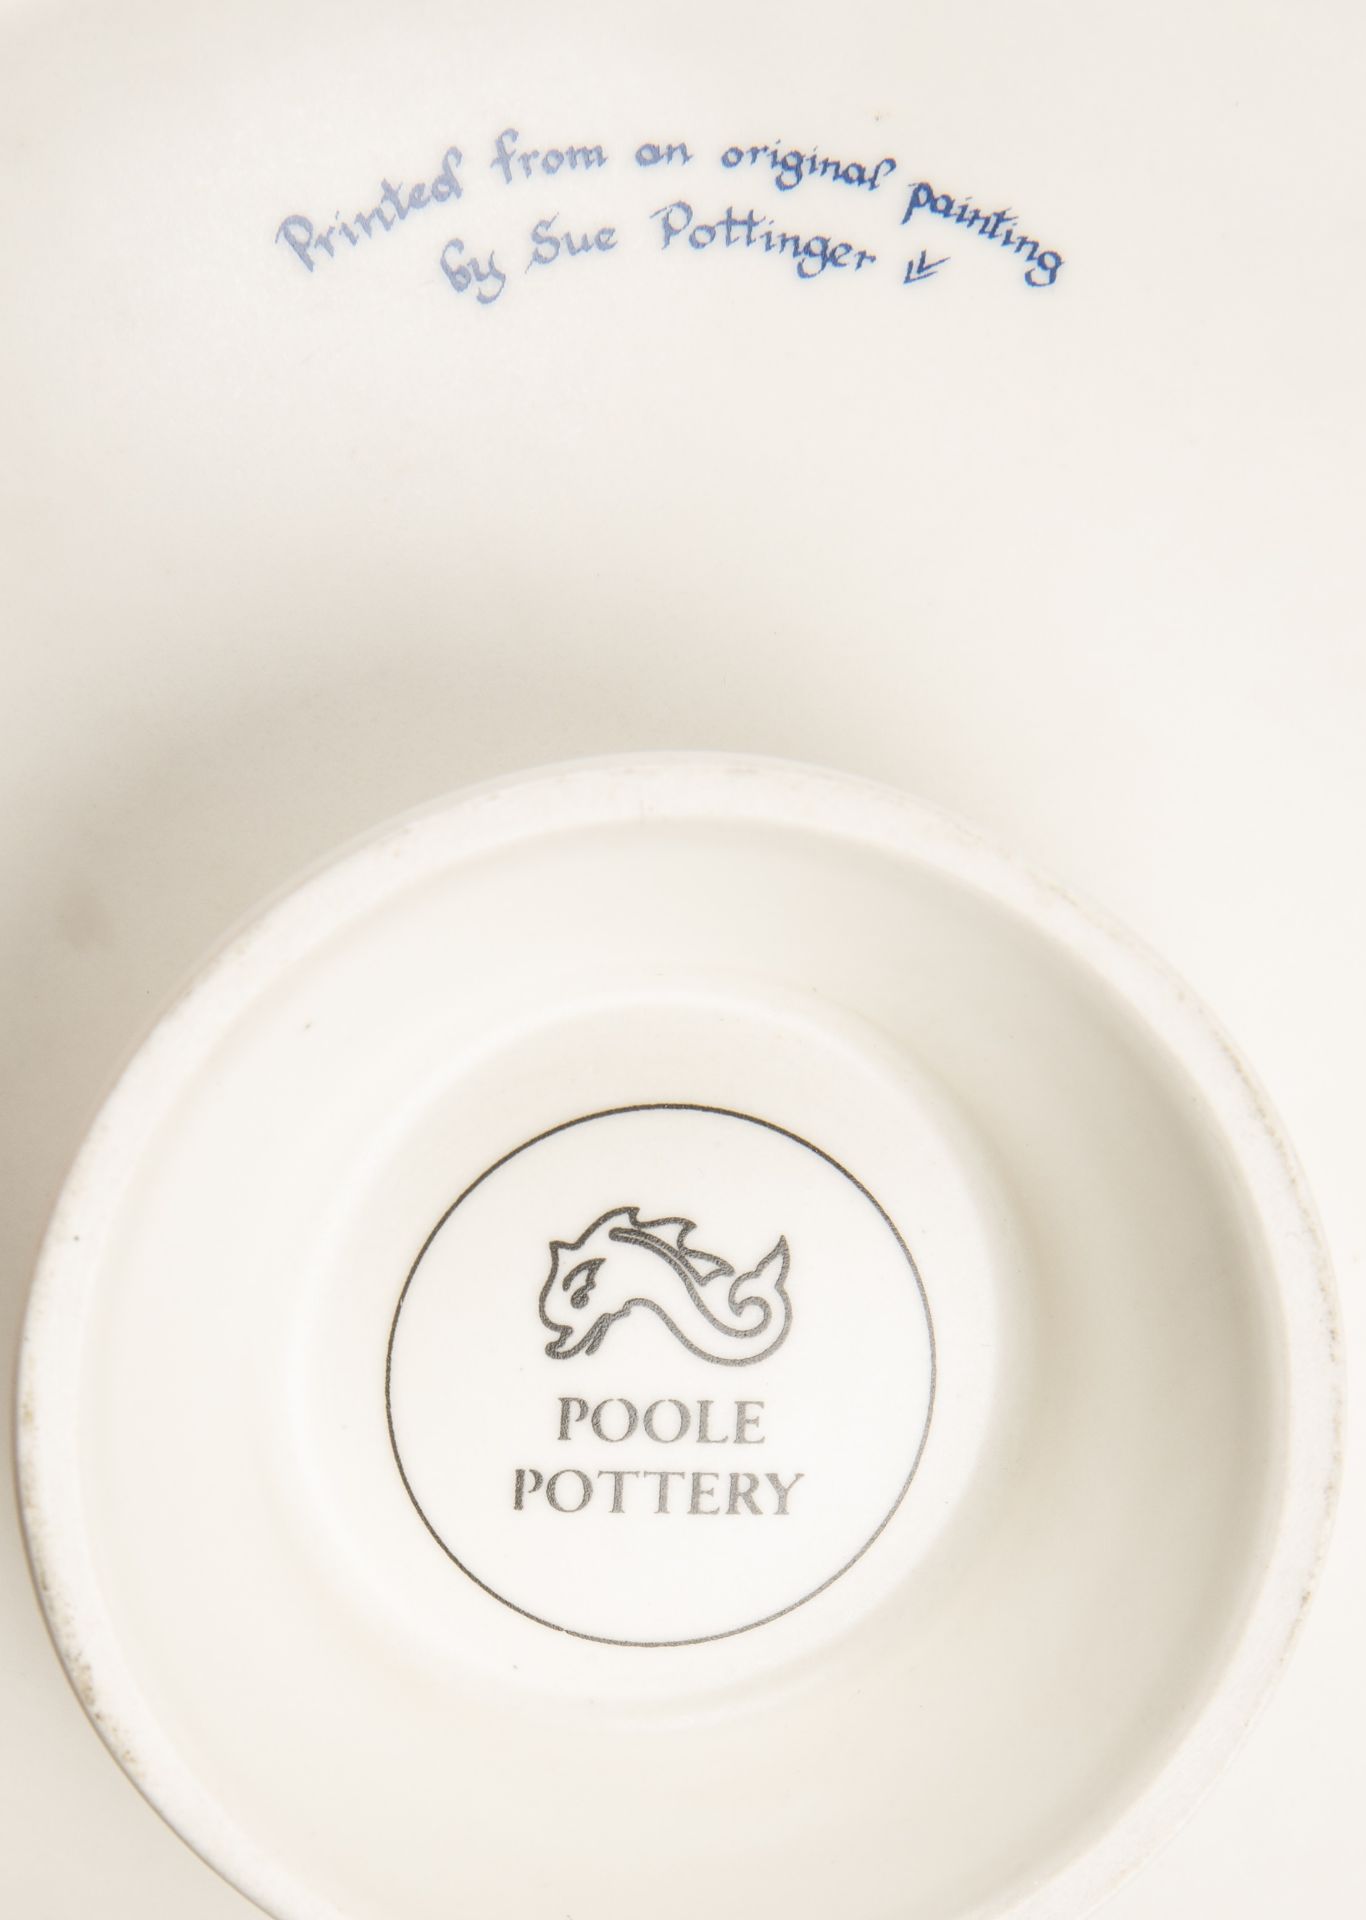 Collection of various Poole Pottery to include RNLI Conference dish, transfer printed, printed marks - Image 7 of 7